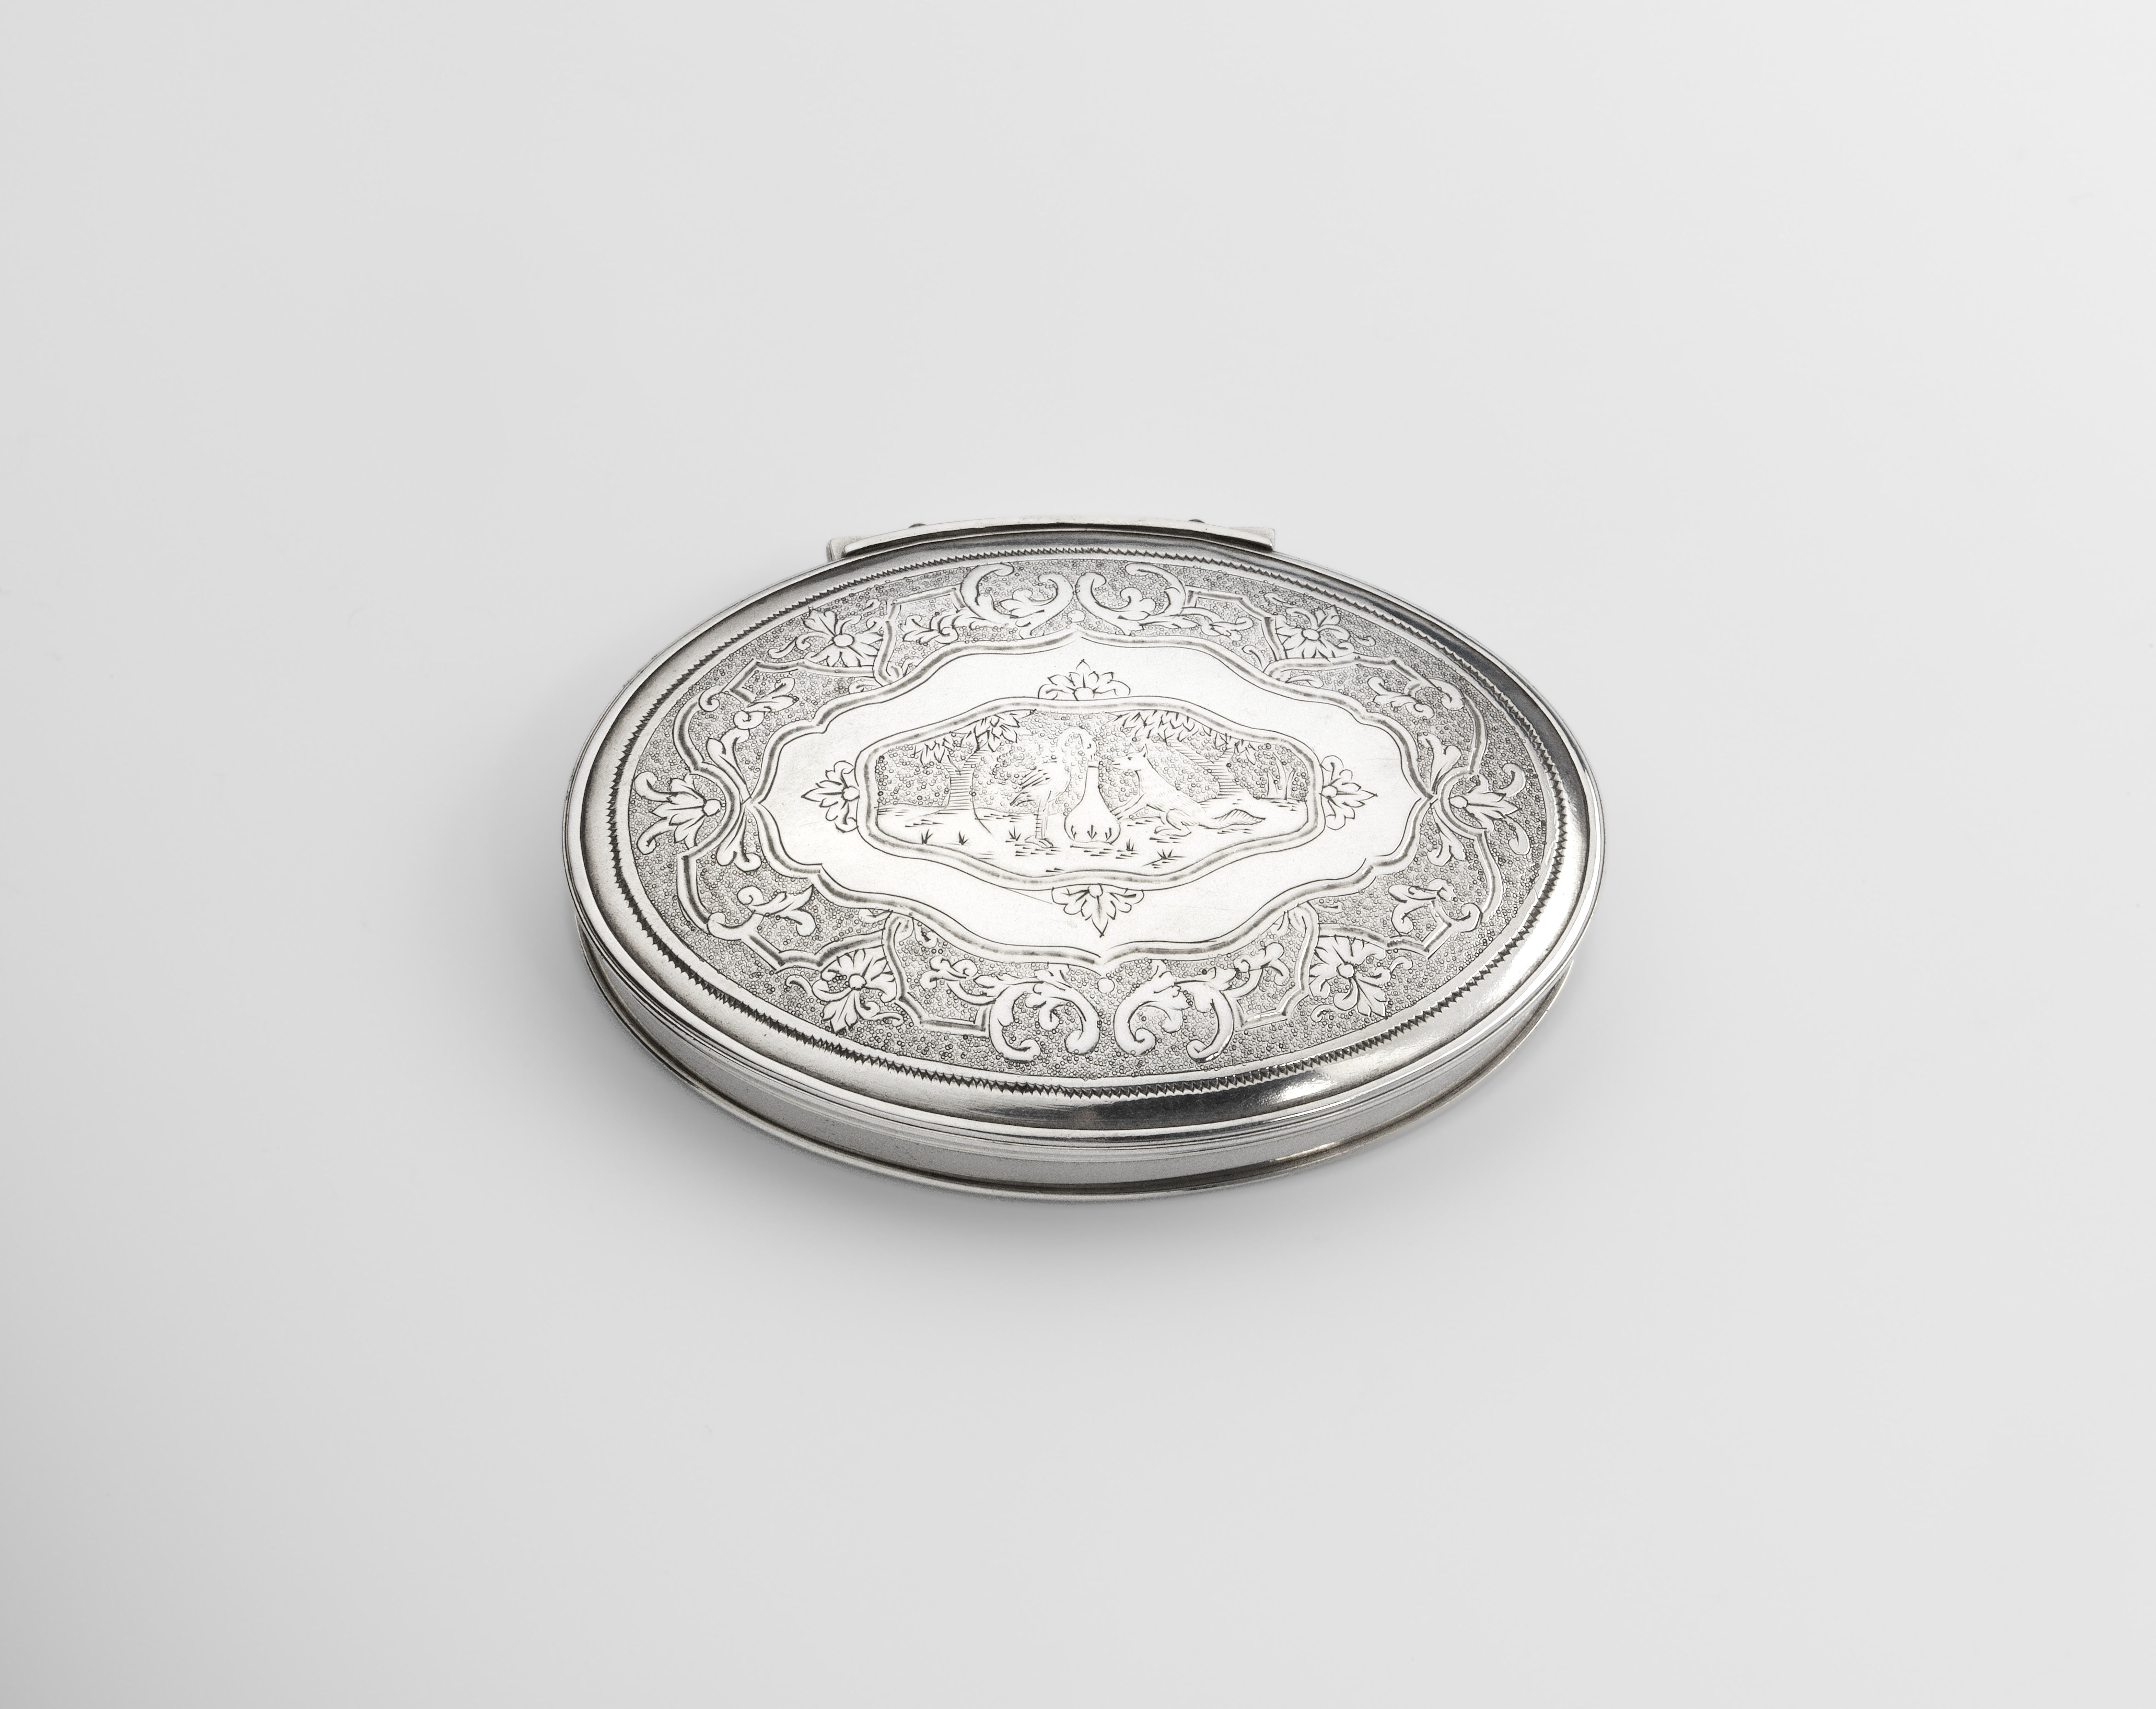 A GEORGE I SILVER SNUFF BOX oval with a "stand-away" hinge, reed borders and a slightly dome